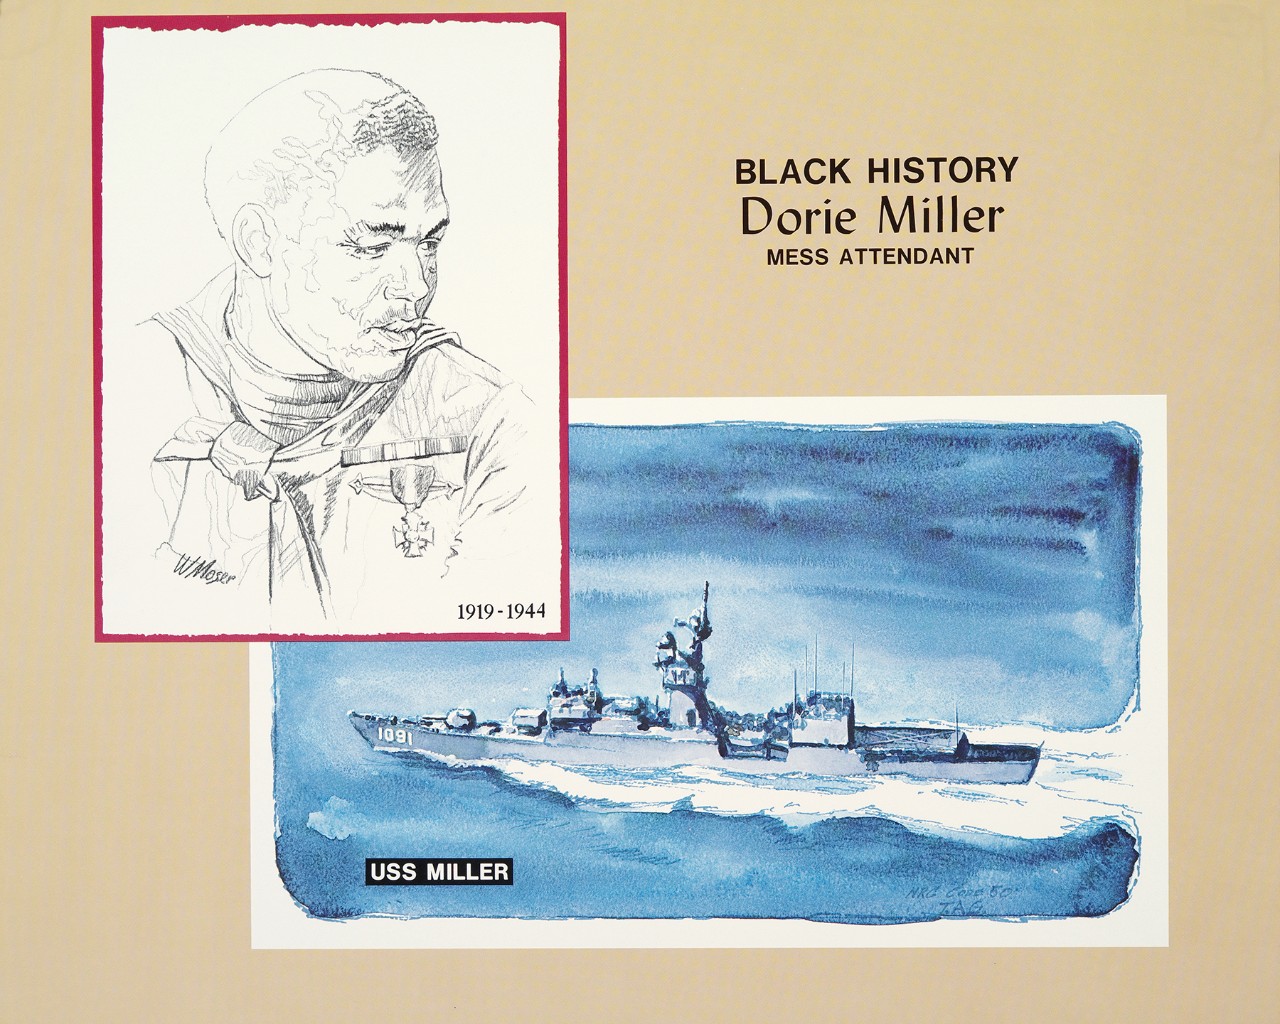 Two images the one on the upper left is a portrait of Dorie Miller. The one of the lower right is a ship portside portrait of USS Miller.